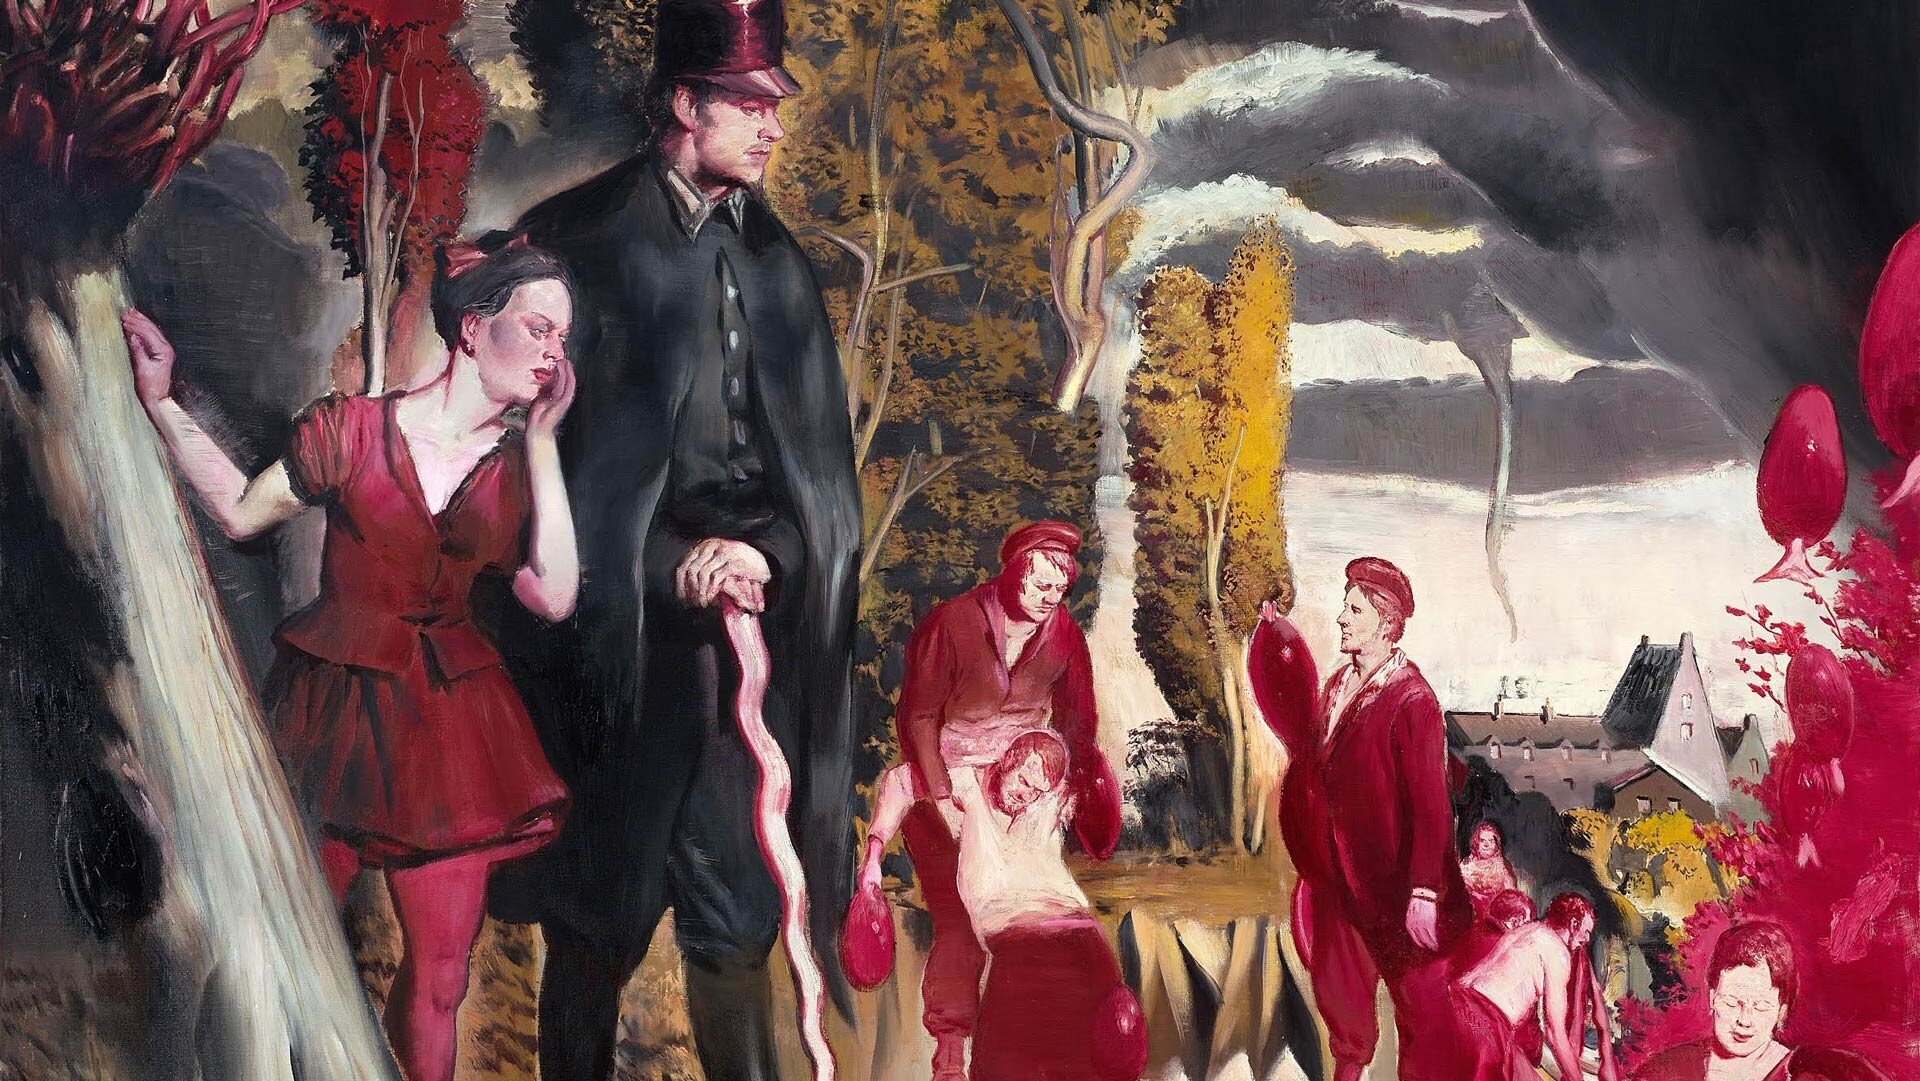 A detail from a painting by Neo Rauch, titled Blutsbrüder, dated 2017.